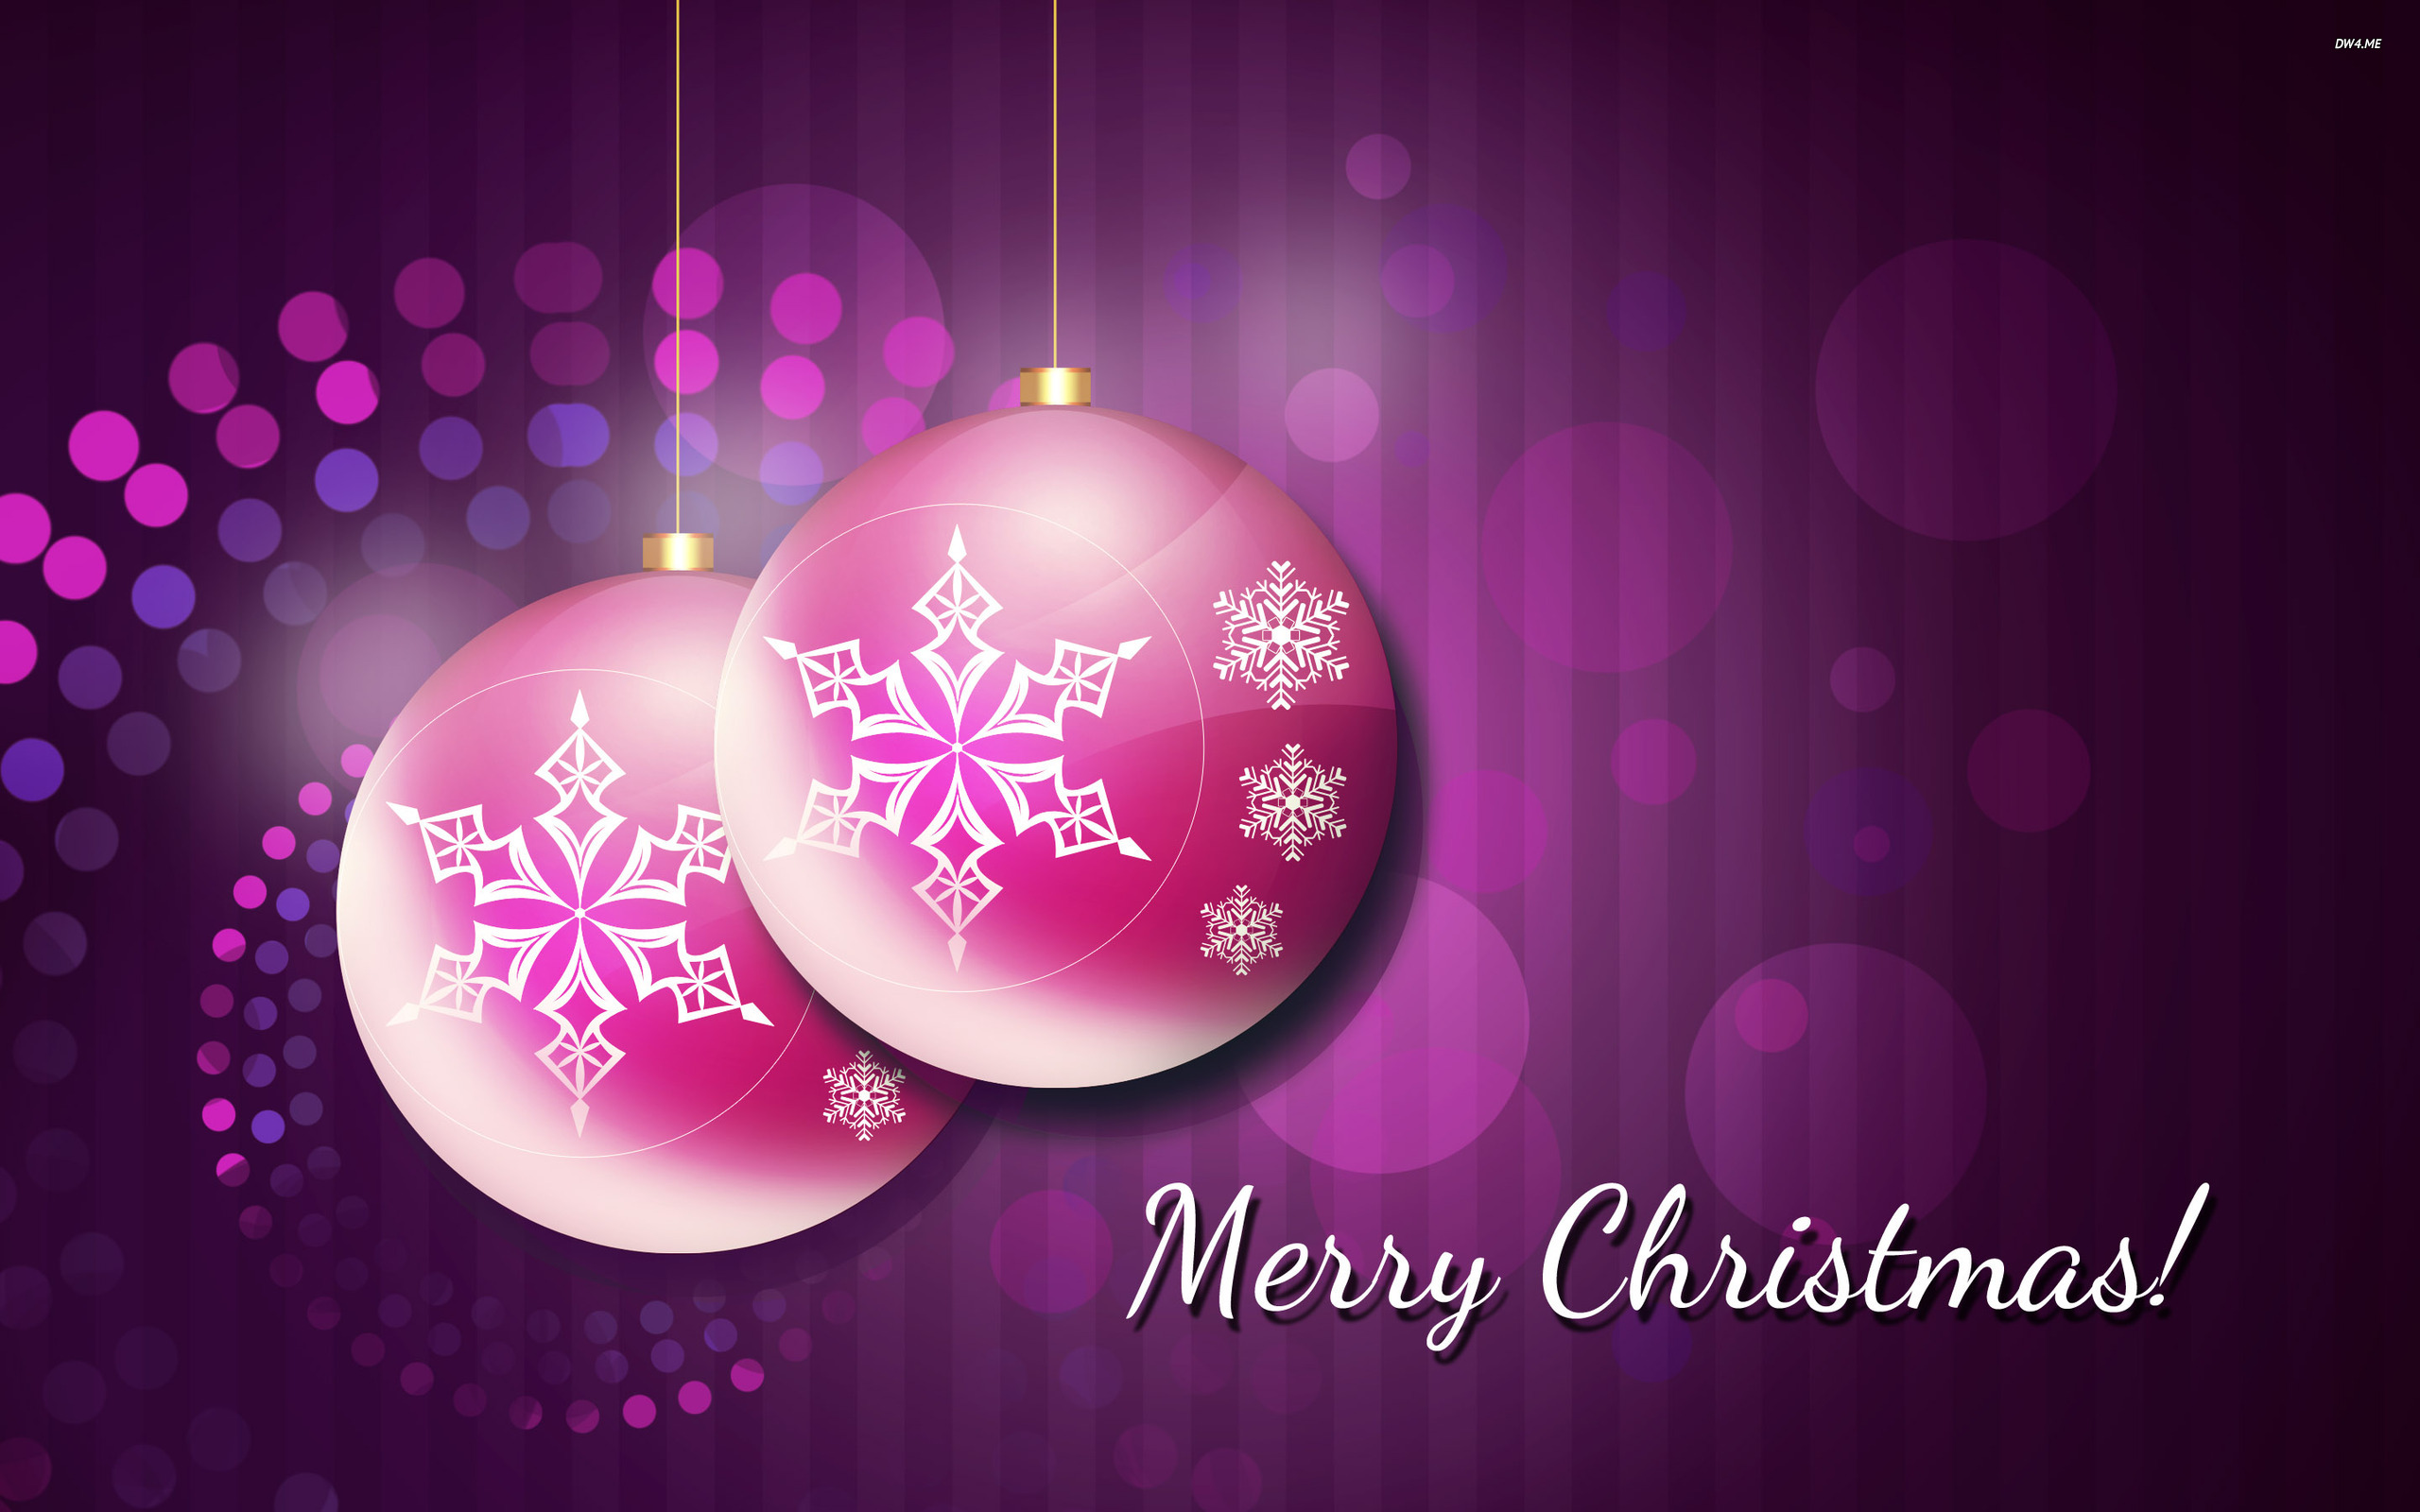 merry christmas full hd wallpaper,pink,text,purple,violet,font